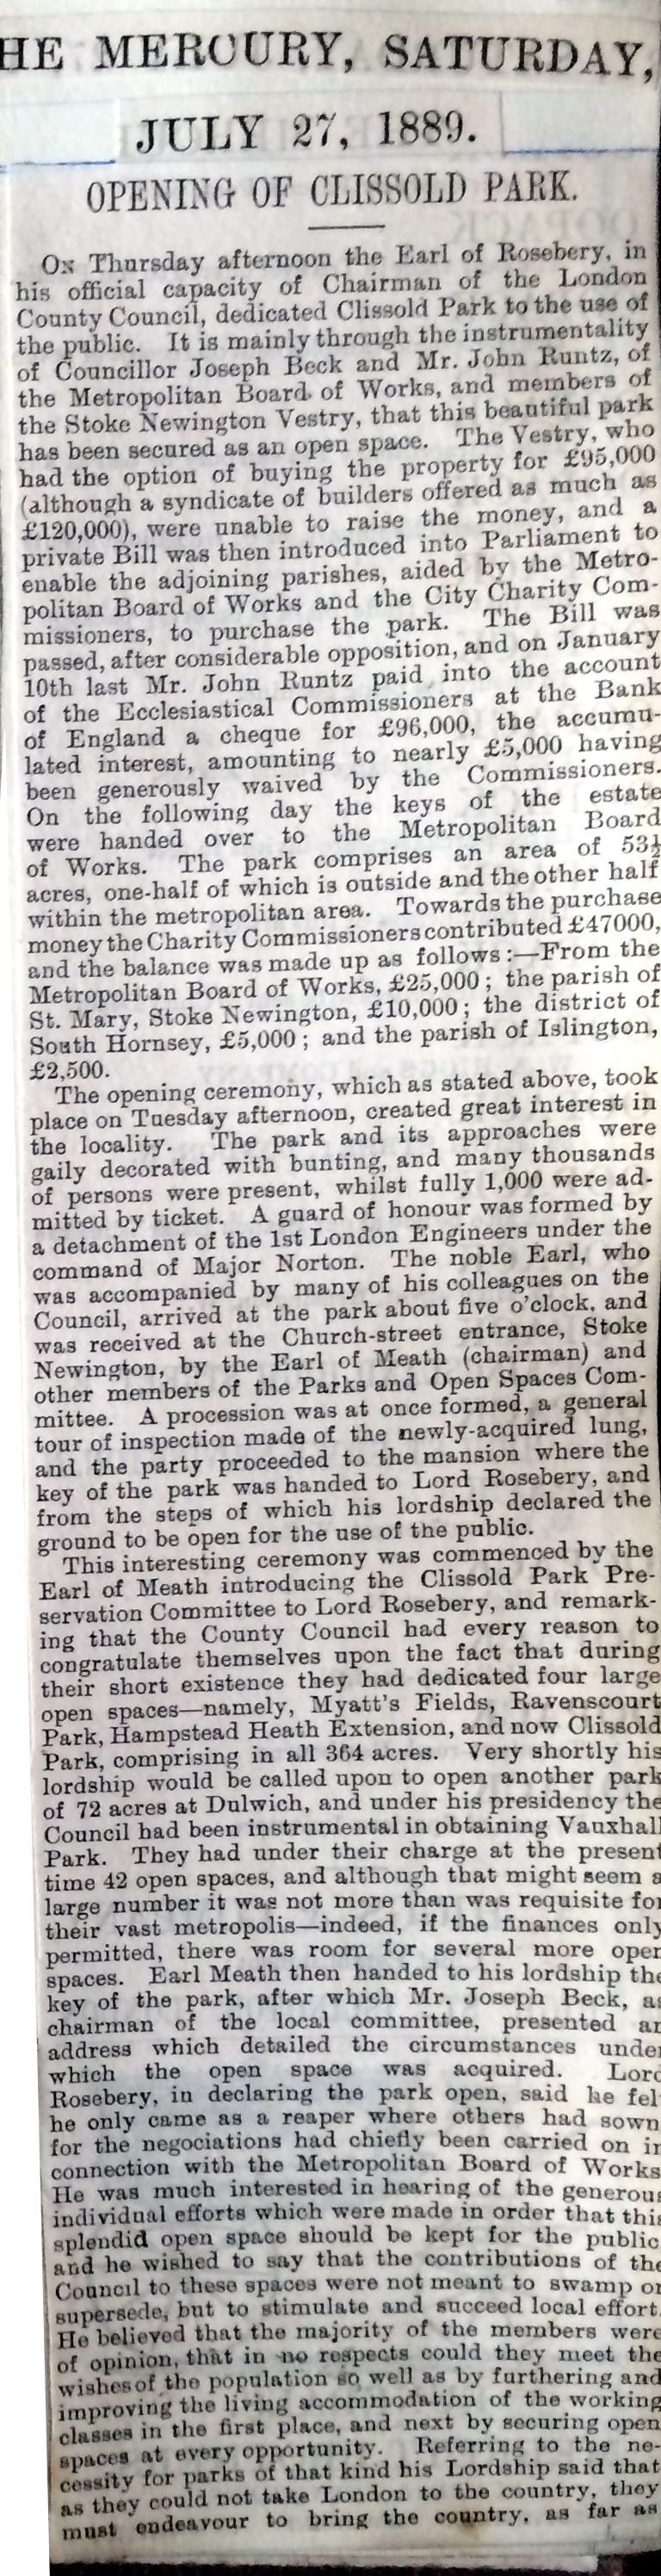 27_07_1889 NEWS CLIPPING Opening of Clissold Park The Mercury